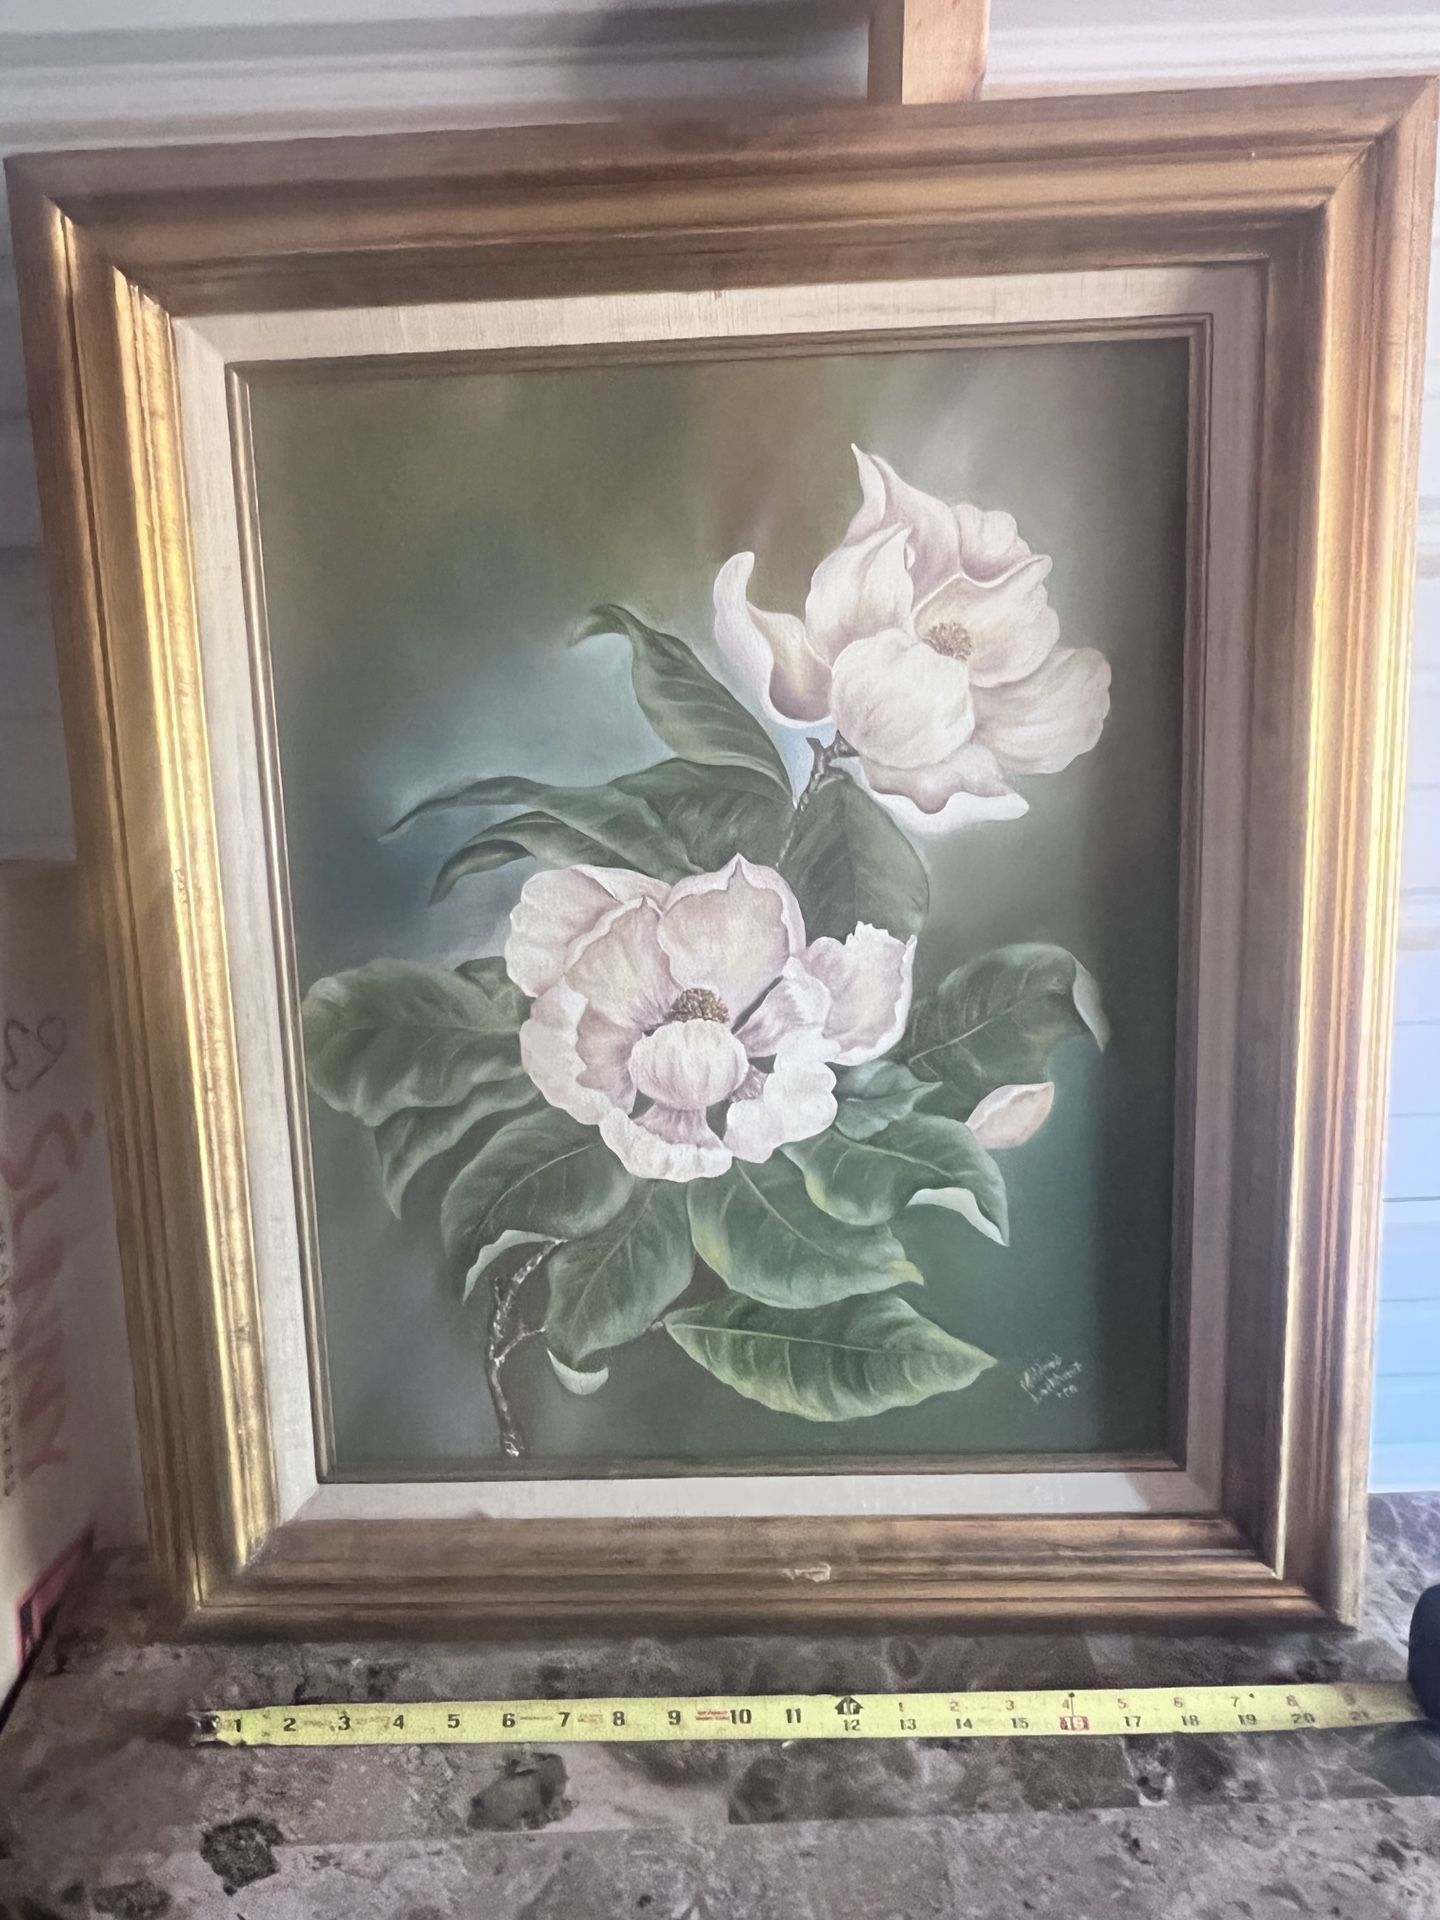 a painting by Mildred Lockhart in a pretty frame its 27 inches tall and 23 inches wide 